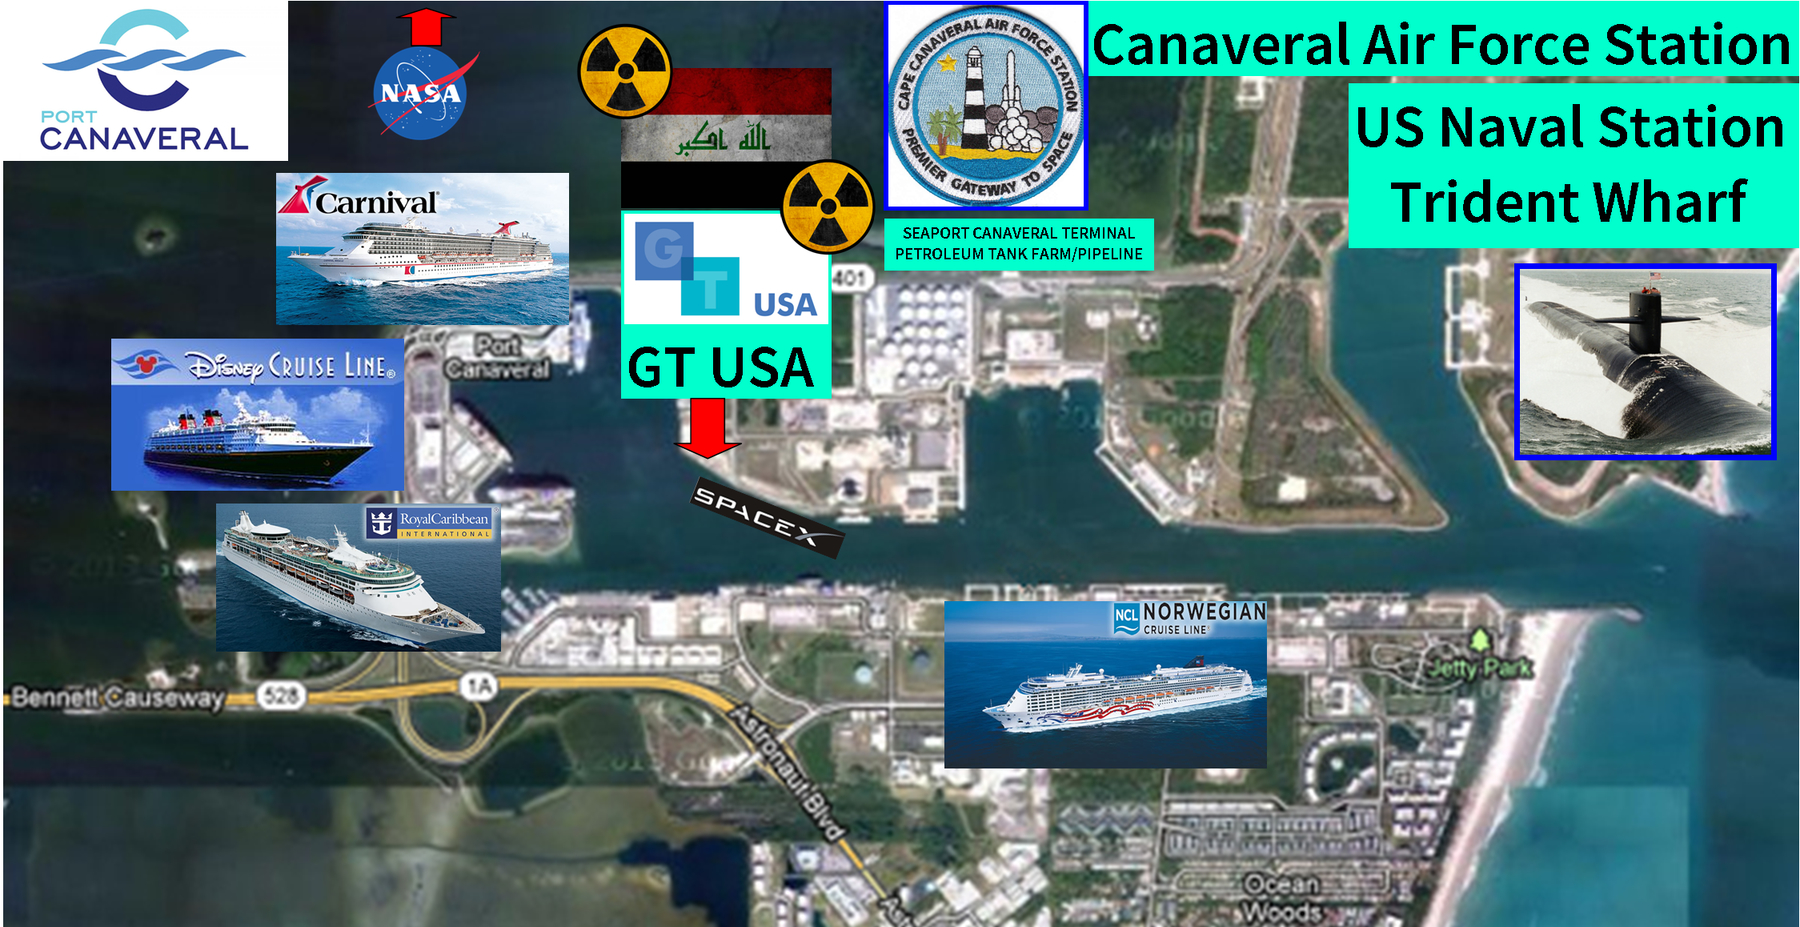 Map of Port Canaveral indicating locations of GT USA container terminal, national security assets, critical infrastructure, SpaceX Falcon 9 barge and cruise ship terminals